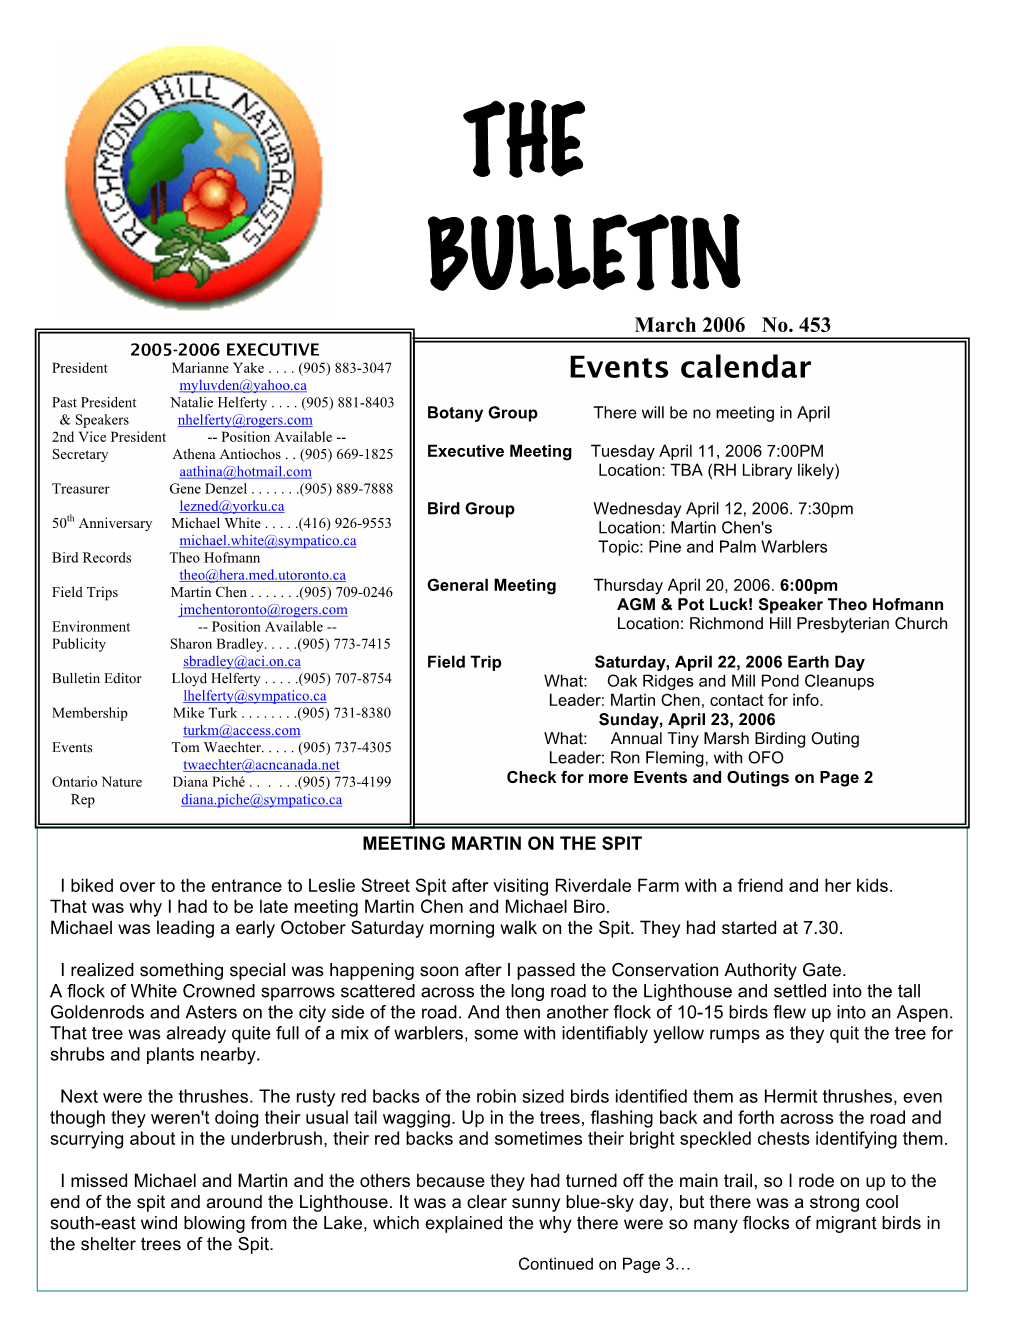 THE BULLETIN March 2006 No